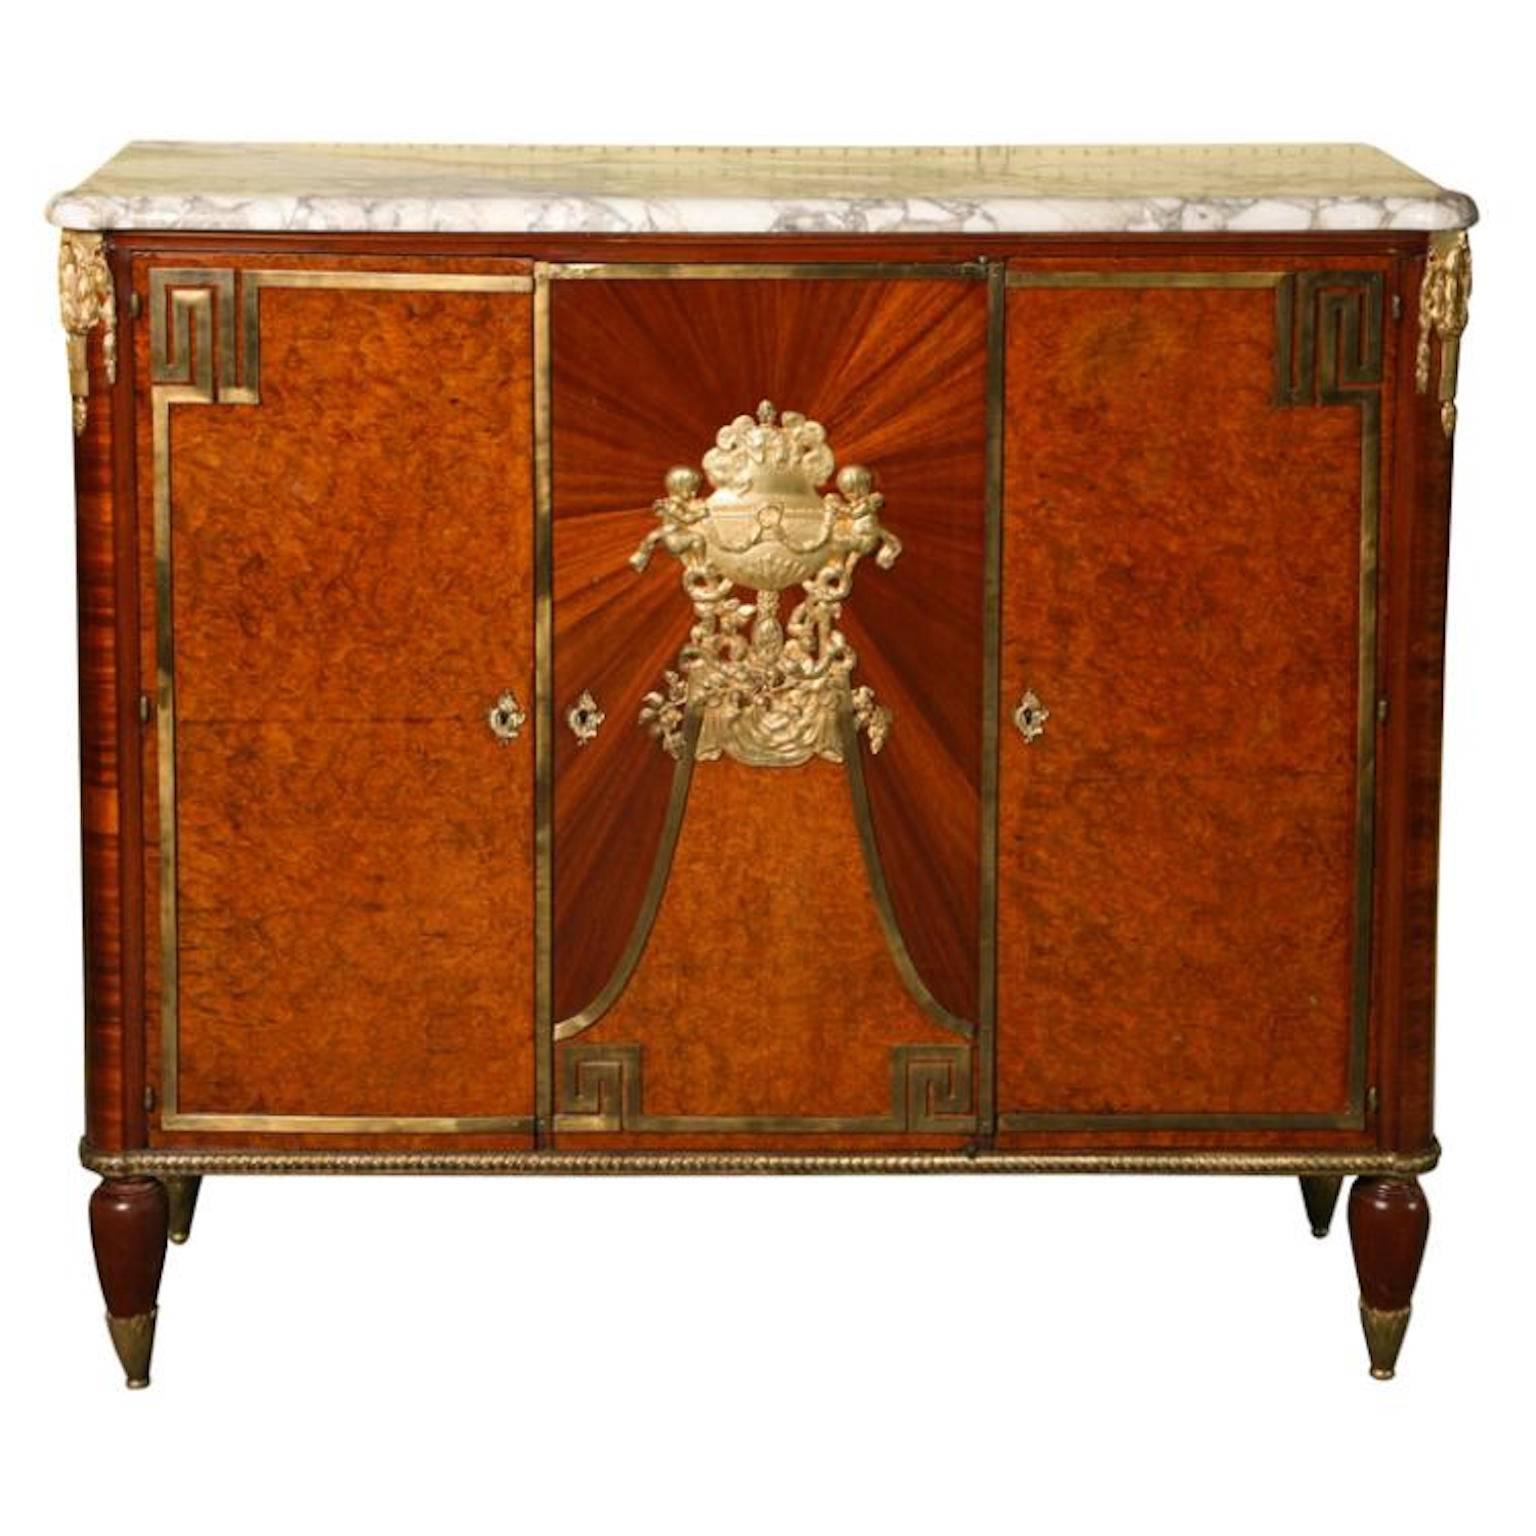 19th Century Louis XVI Style Bronze-Mounted Marble-Top Mahogany Cabinet For Sale